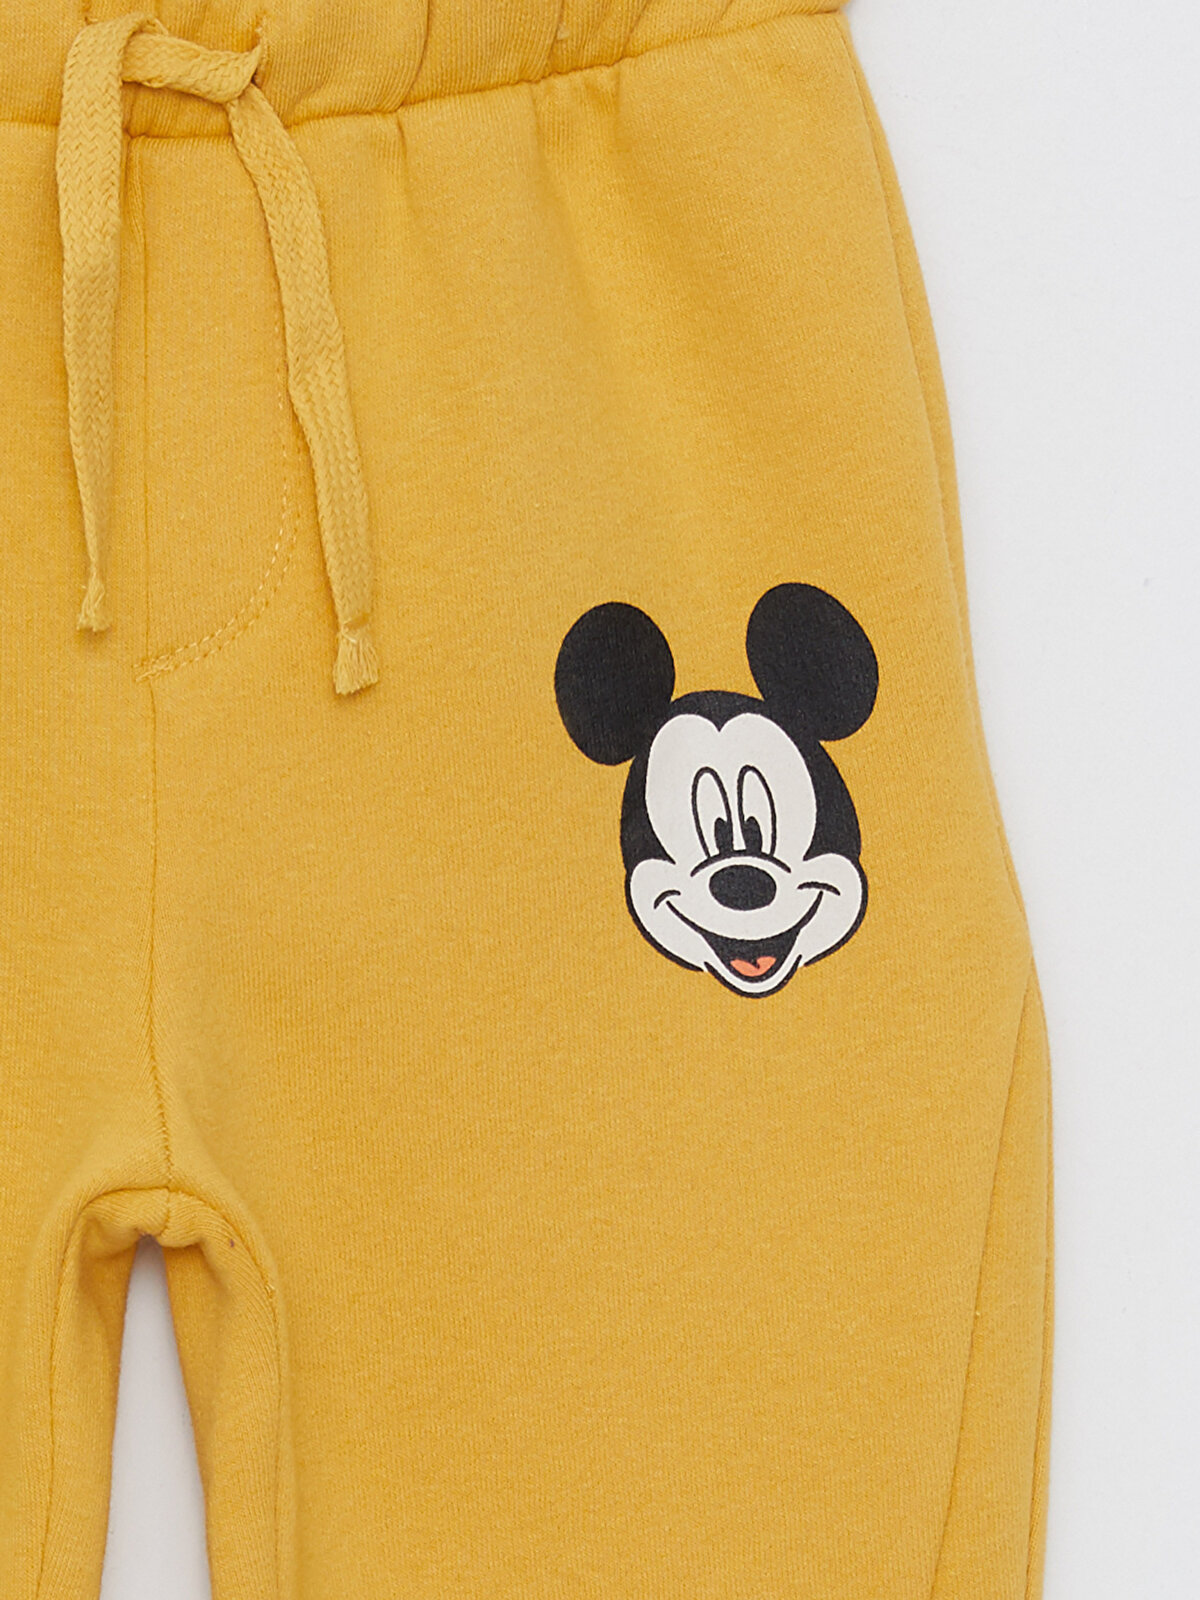 Mickey Mouse Printed Baby Boy Tracksuit Bottom With Elastic Waist  -W2CO09Z1-G4N - W2CO09Z1-G4N - LC Waikiki